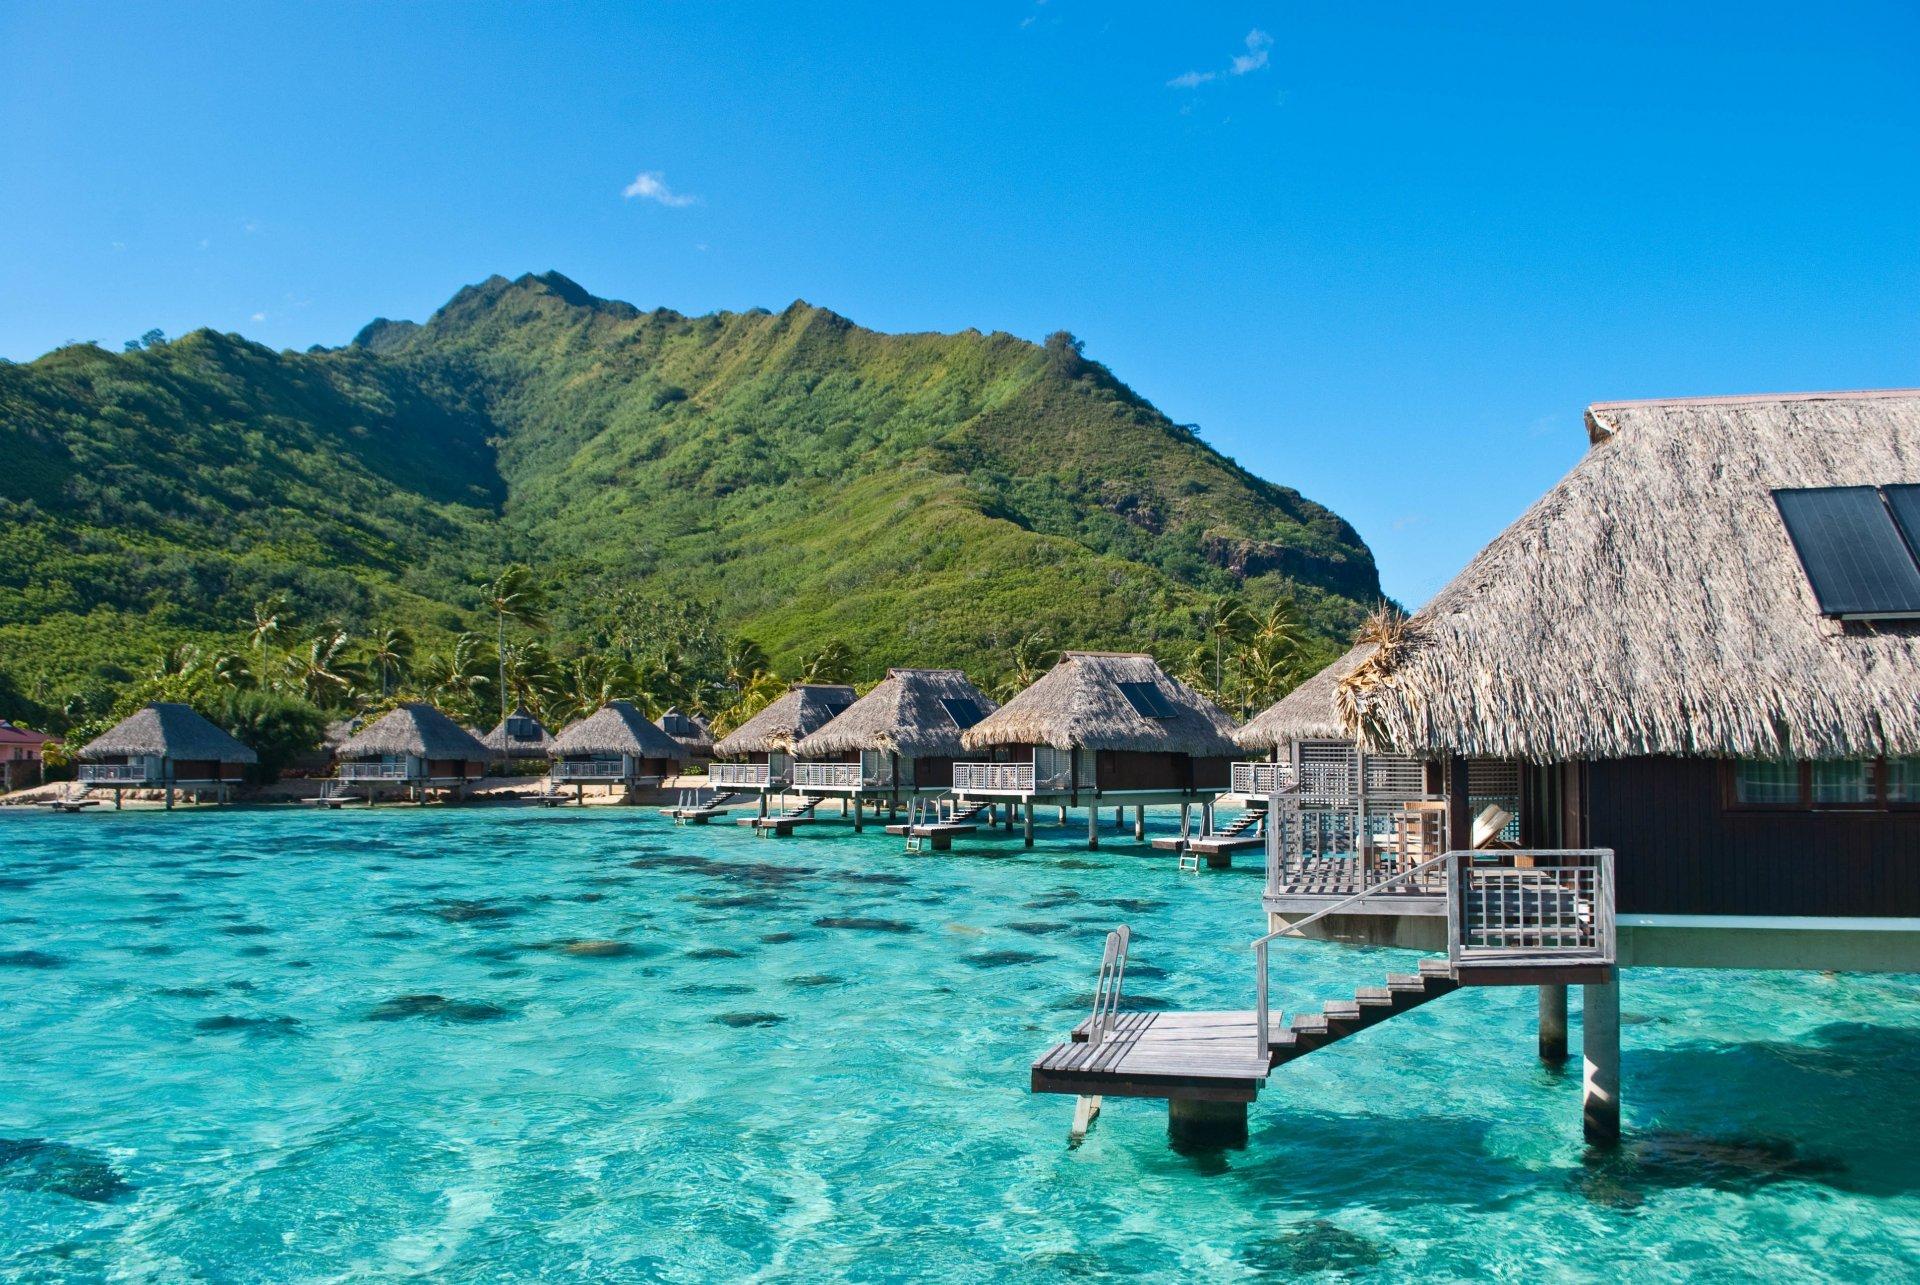 Ocean bungalow hotel exotic moorea french polynesia 2K wallpapers